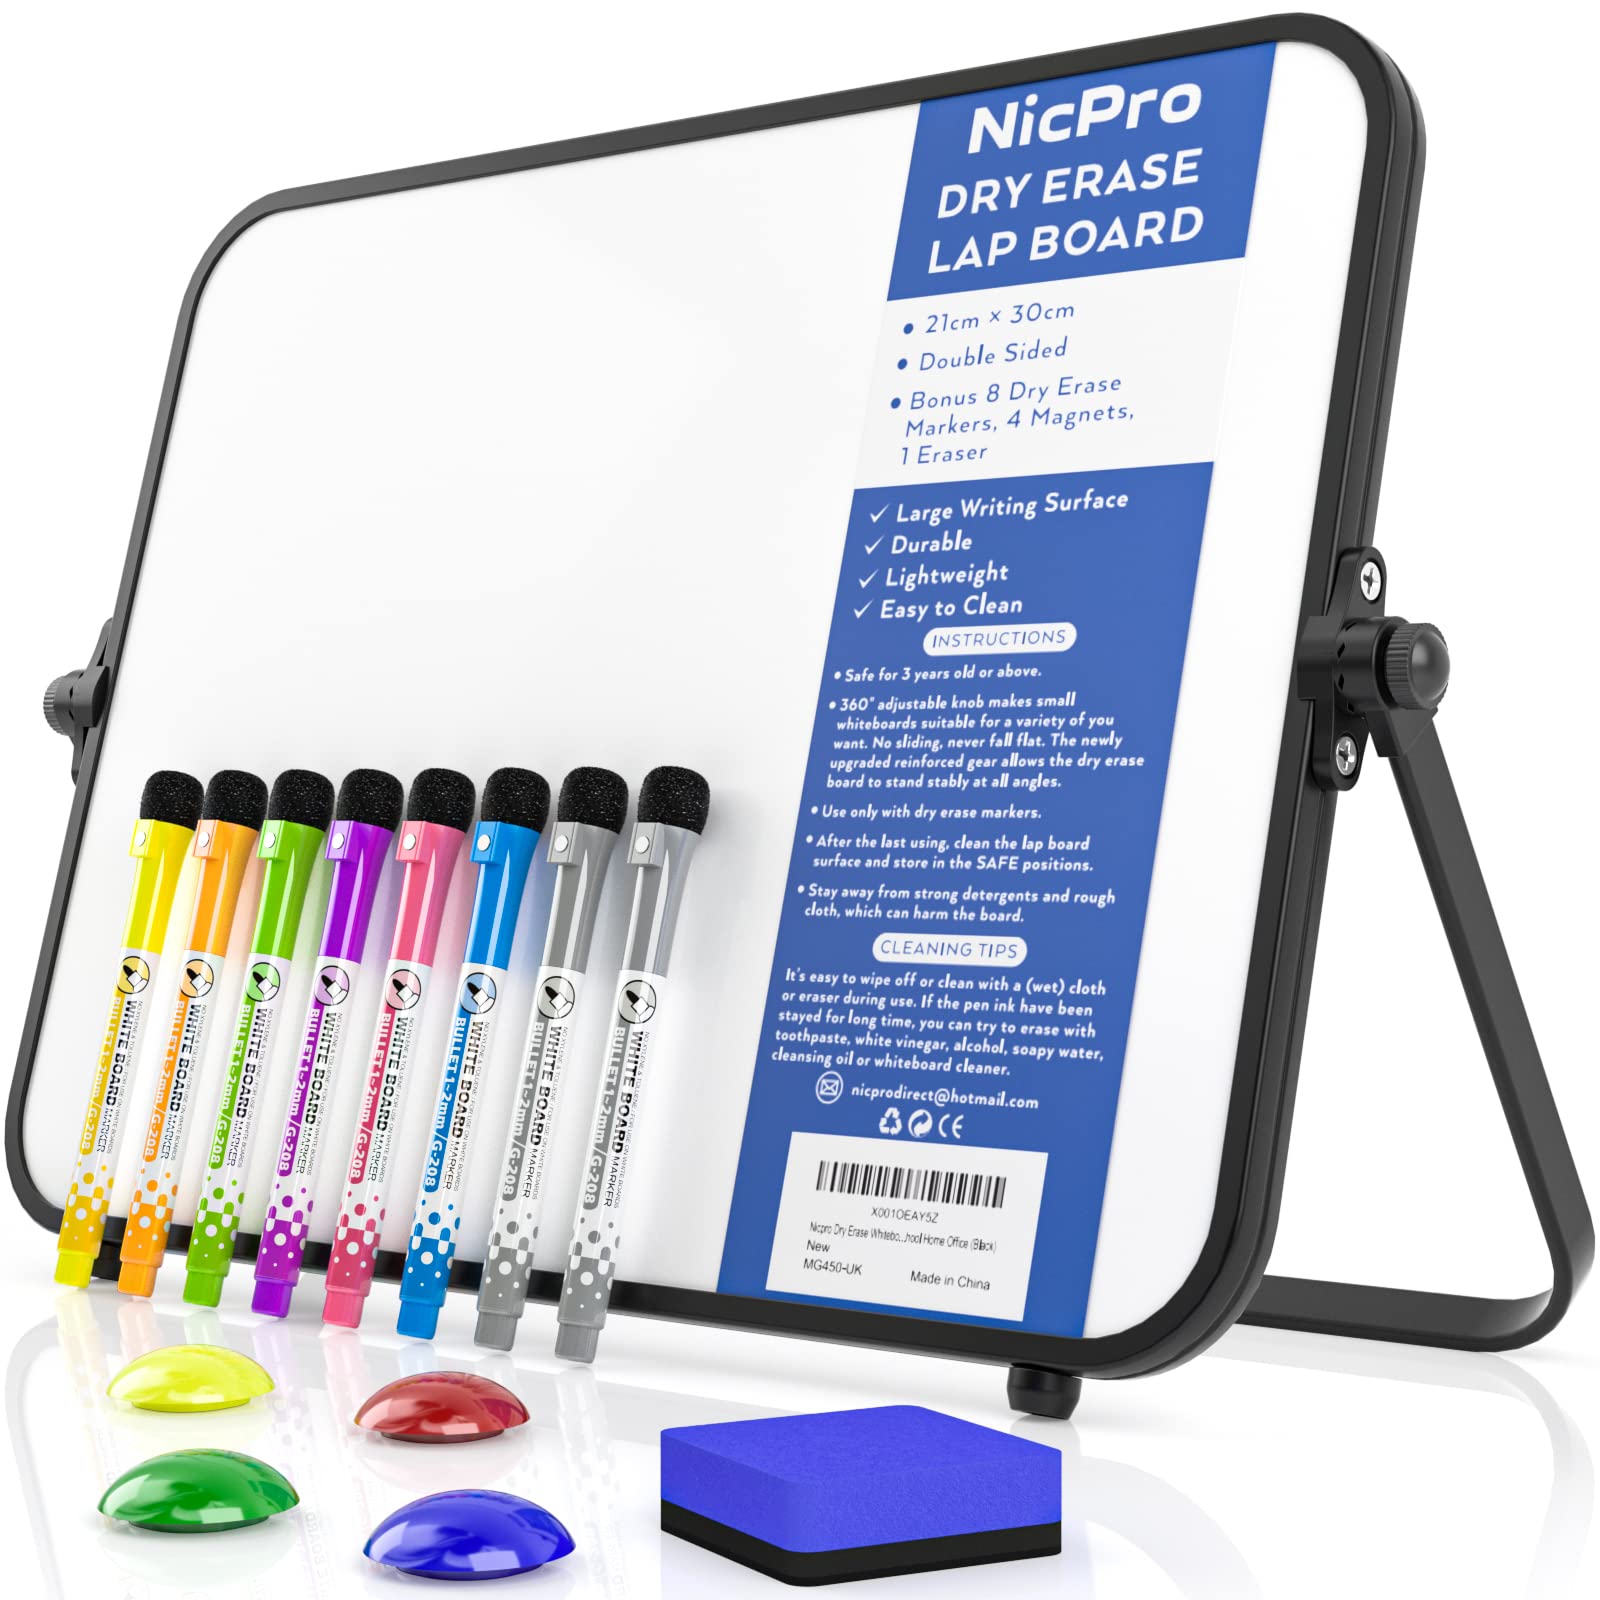 Nicpro Dry Erase Small Whiteboard A4 with Non-Slip Stand, 21 x 30 cm Double Sided Magnetic Desktop White Board 8 Pens, Eraser, Magnet, Portable Writing Easel, Blue, Green, Purple, White, (MG450)